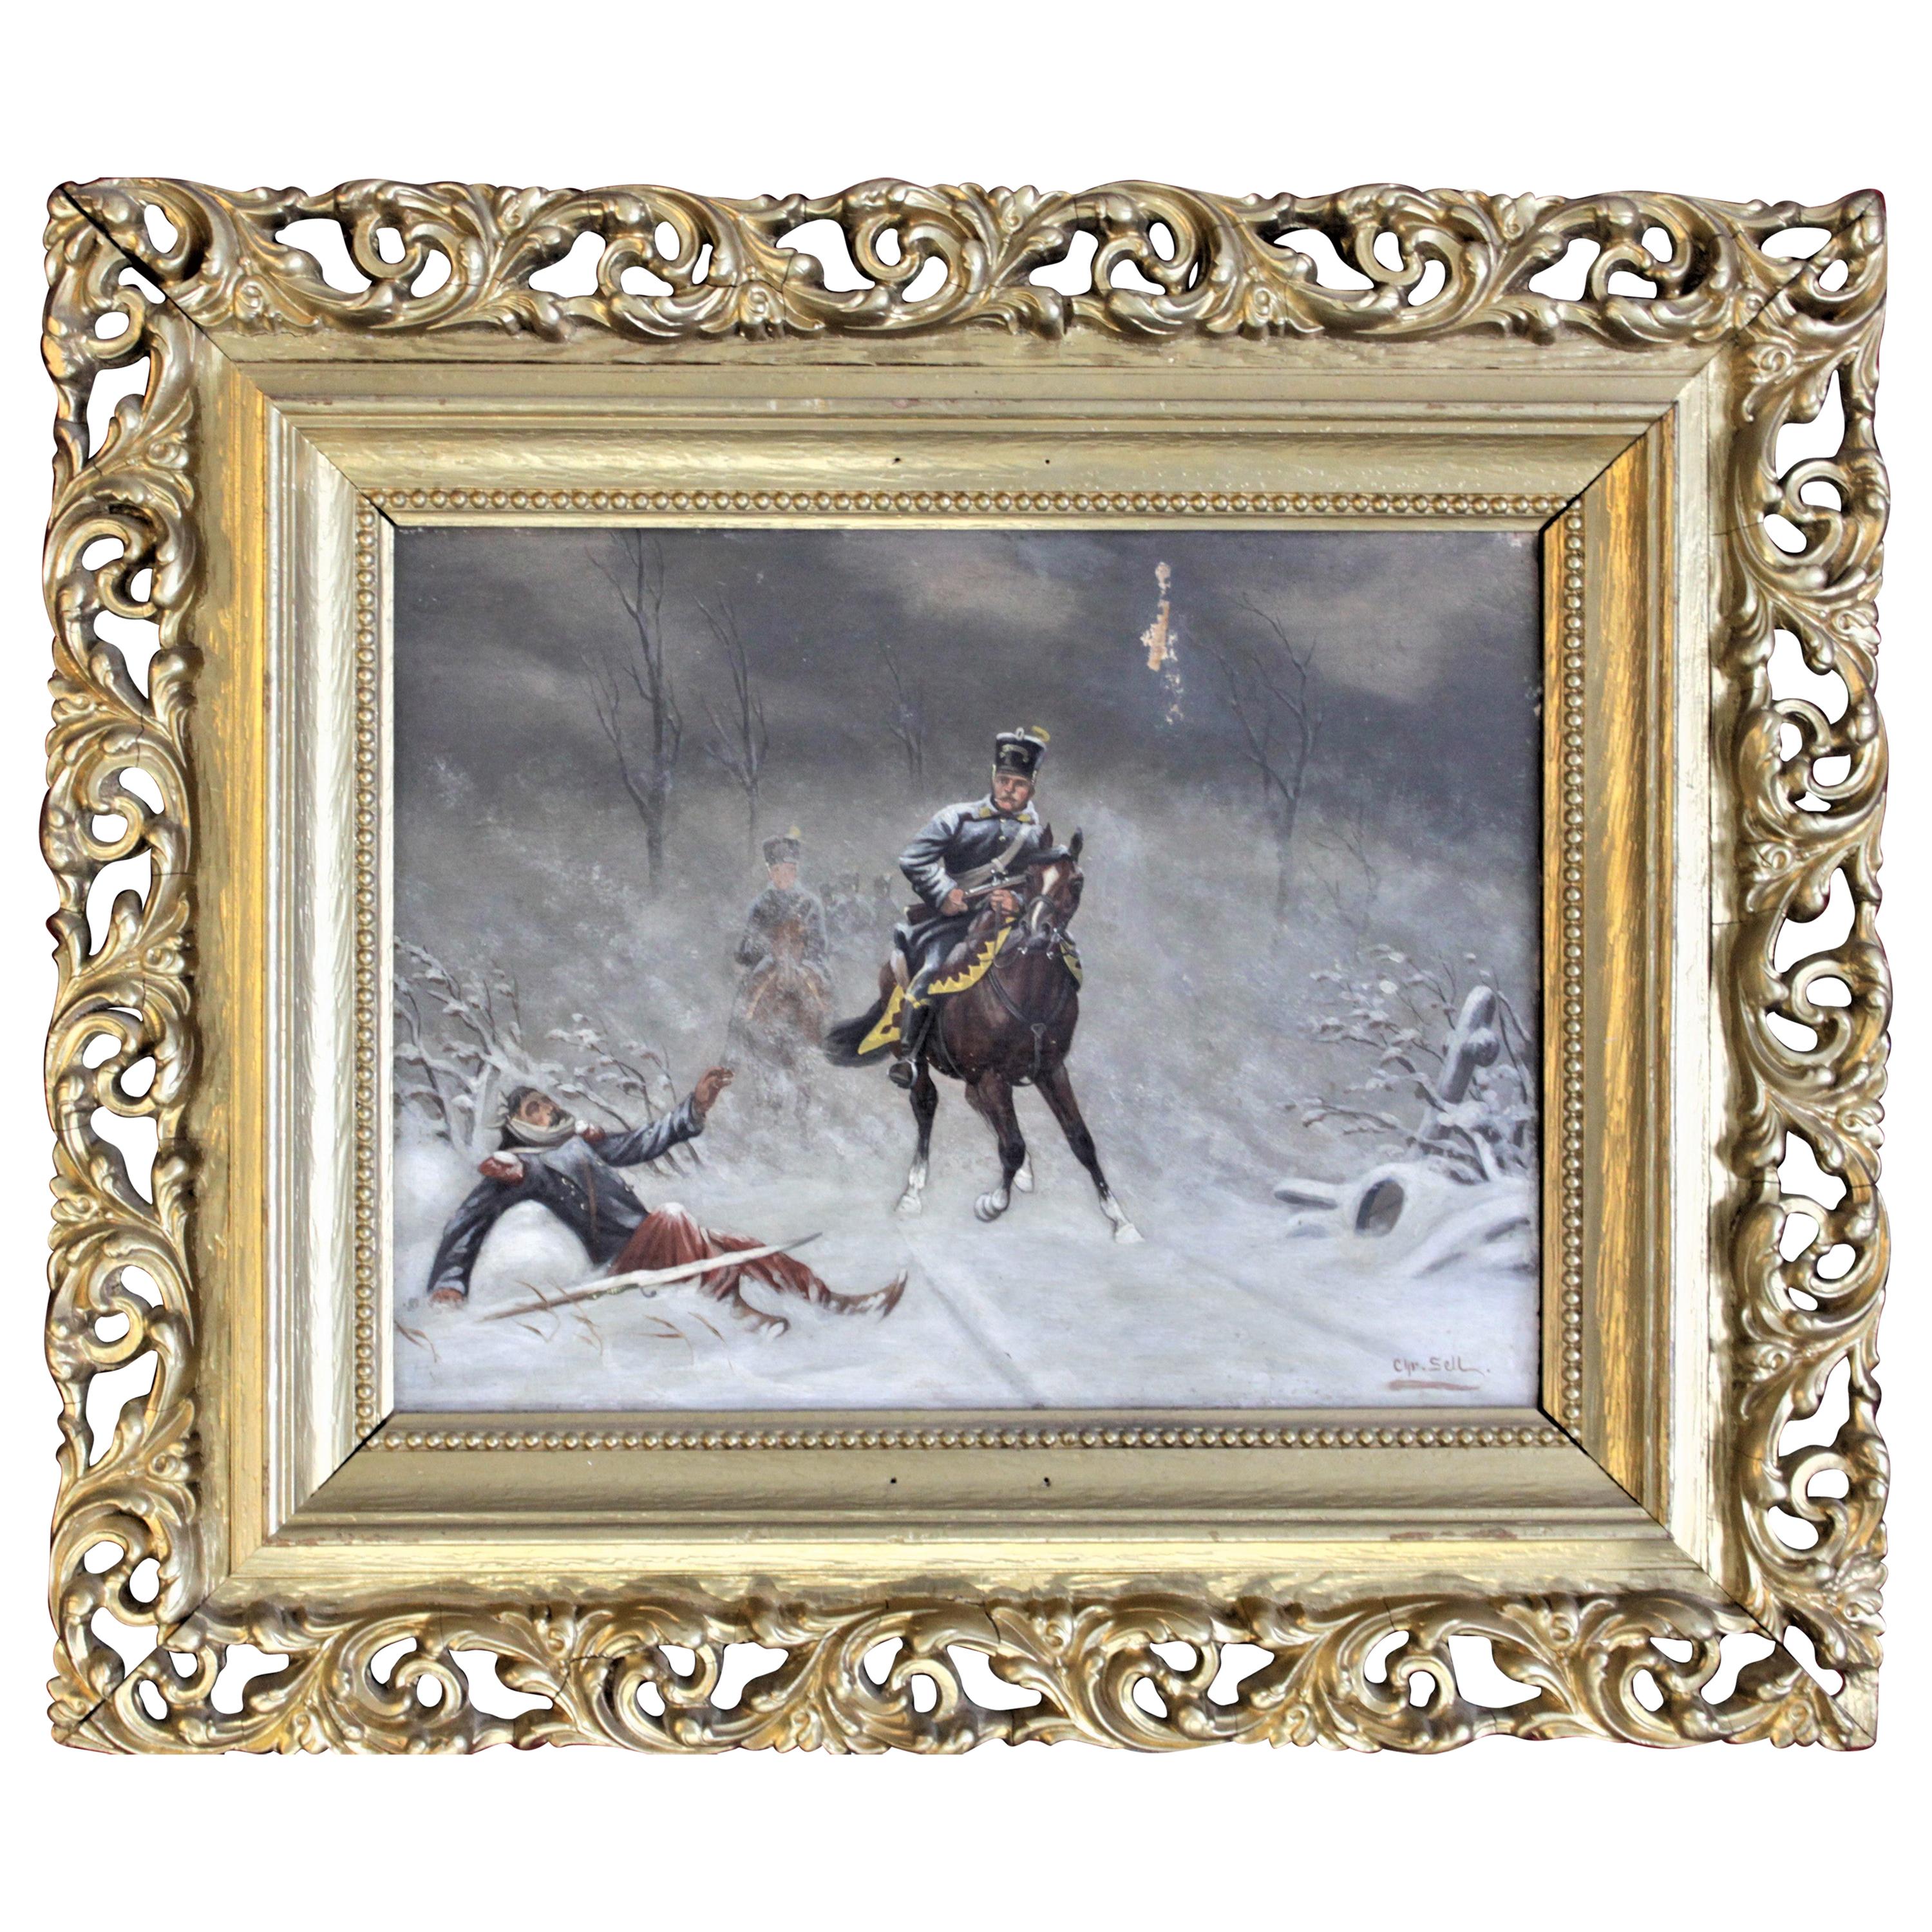 Original Christian Sell Oil Painting on Panel of Soldiers in Battle For Sale